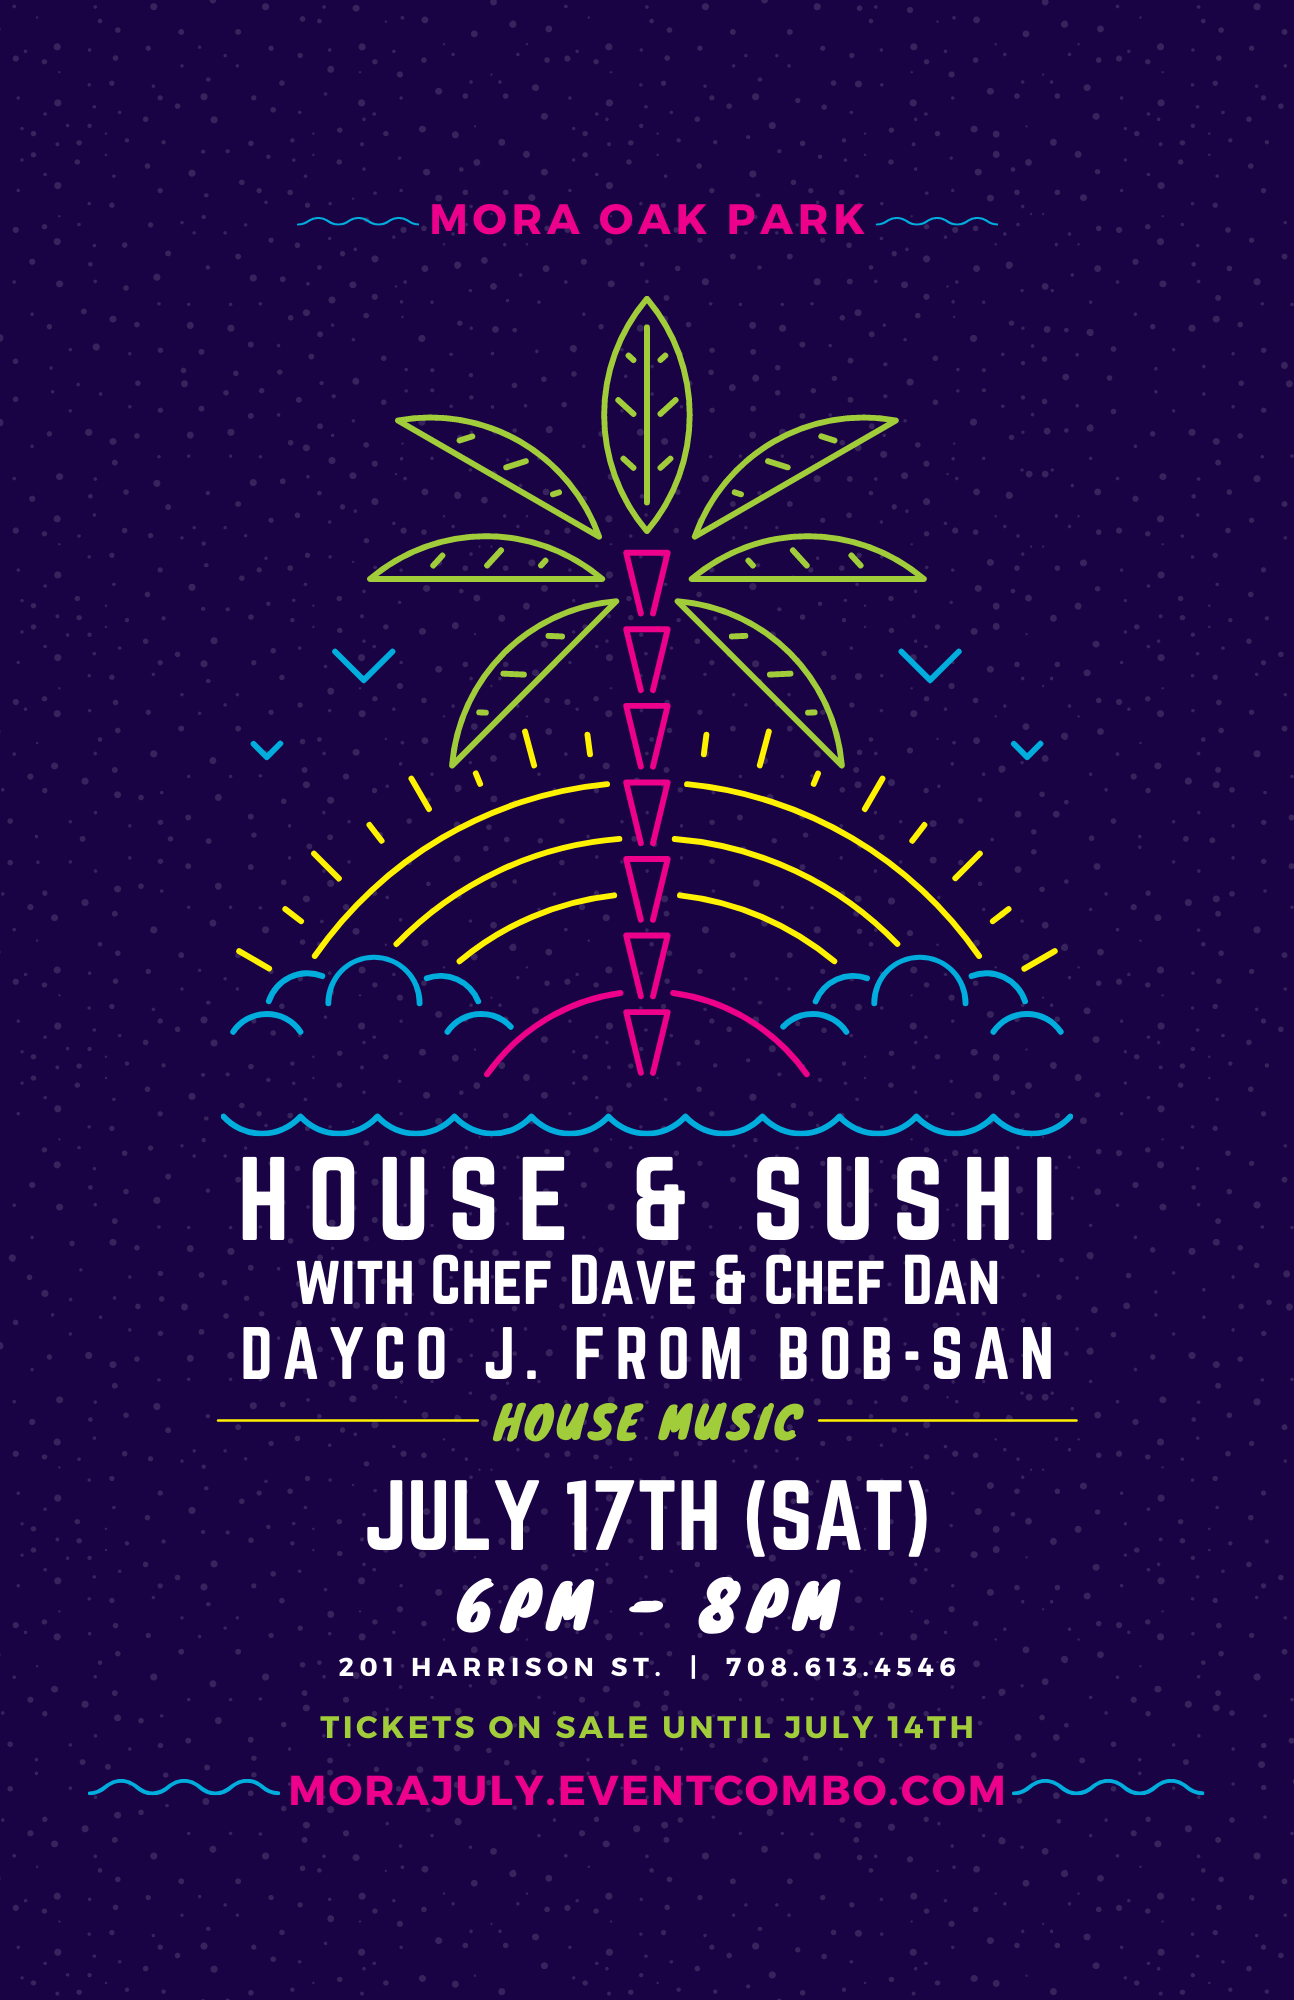 Mora Oak Park: HOUSE & SUSHI with a Guest Chef Dayco J.